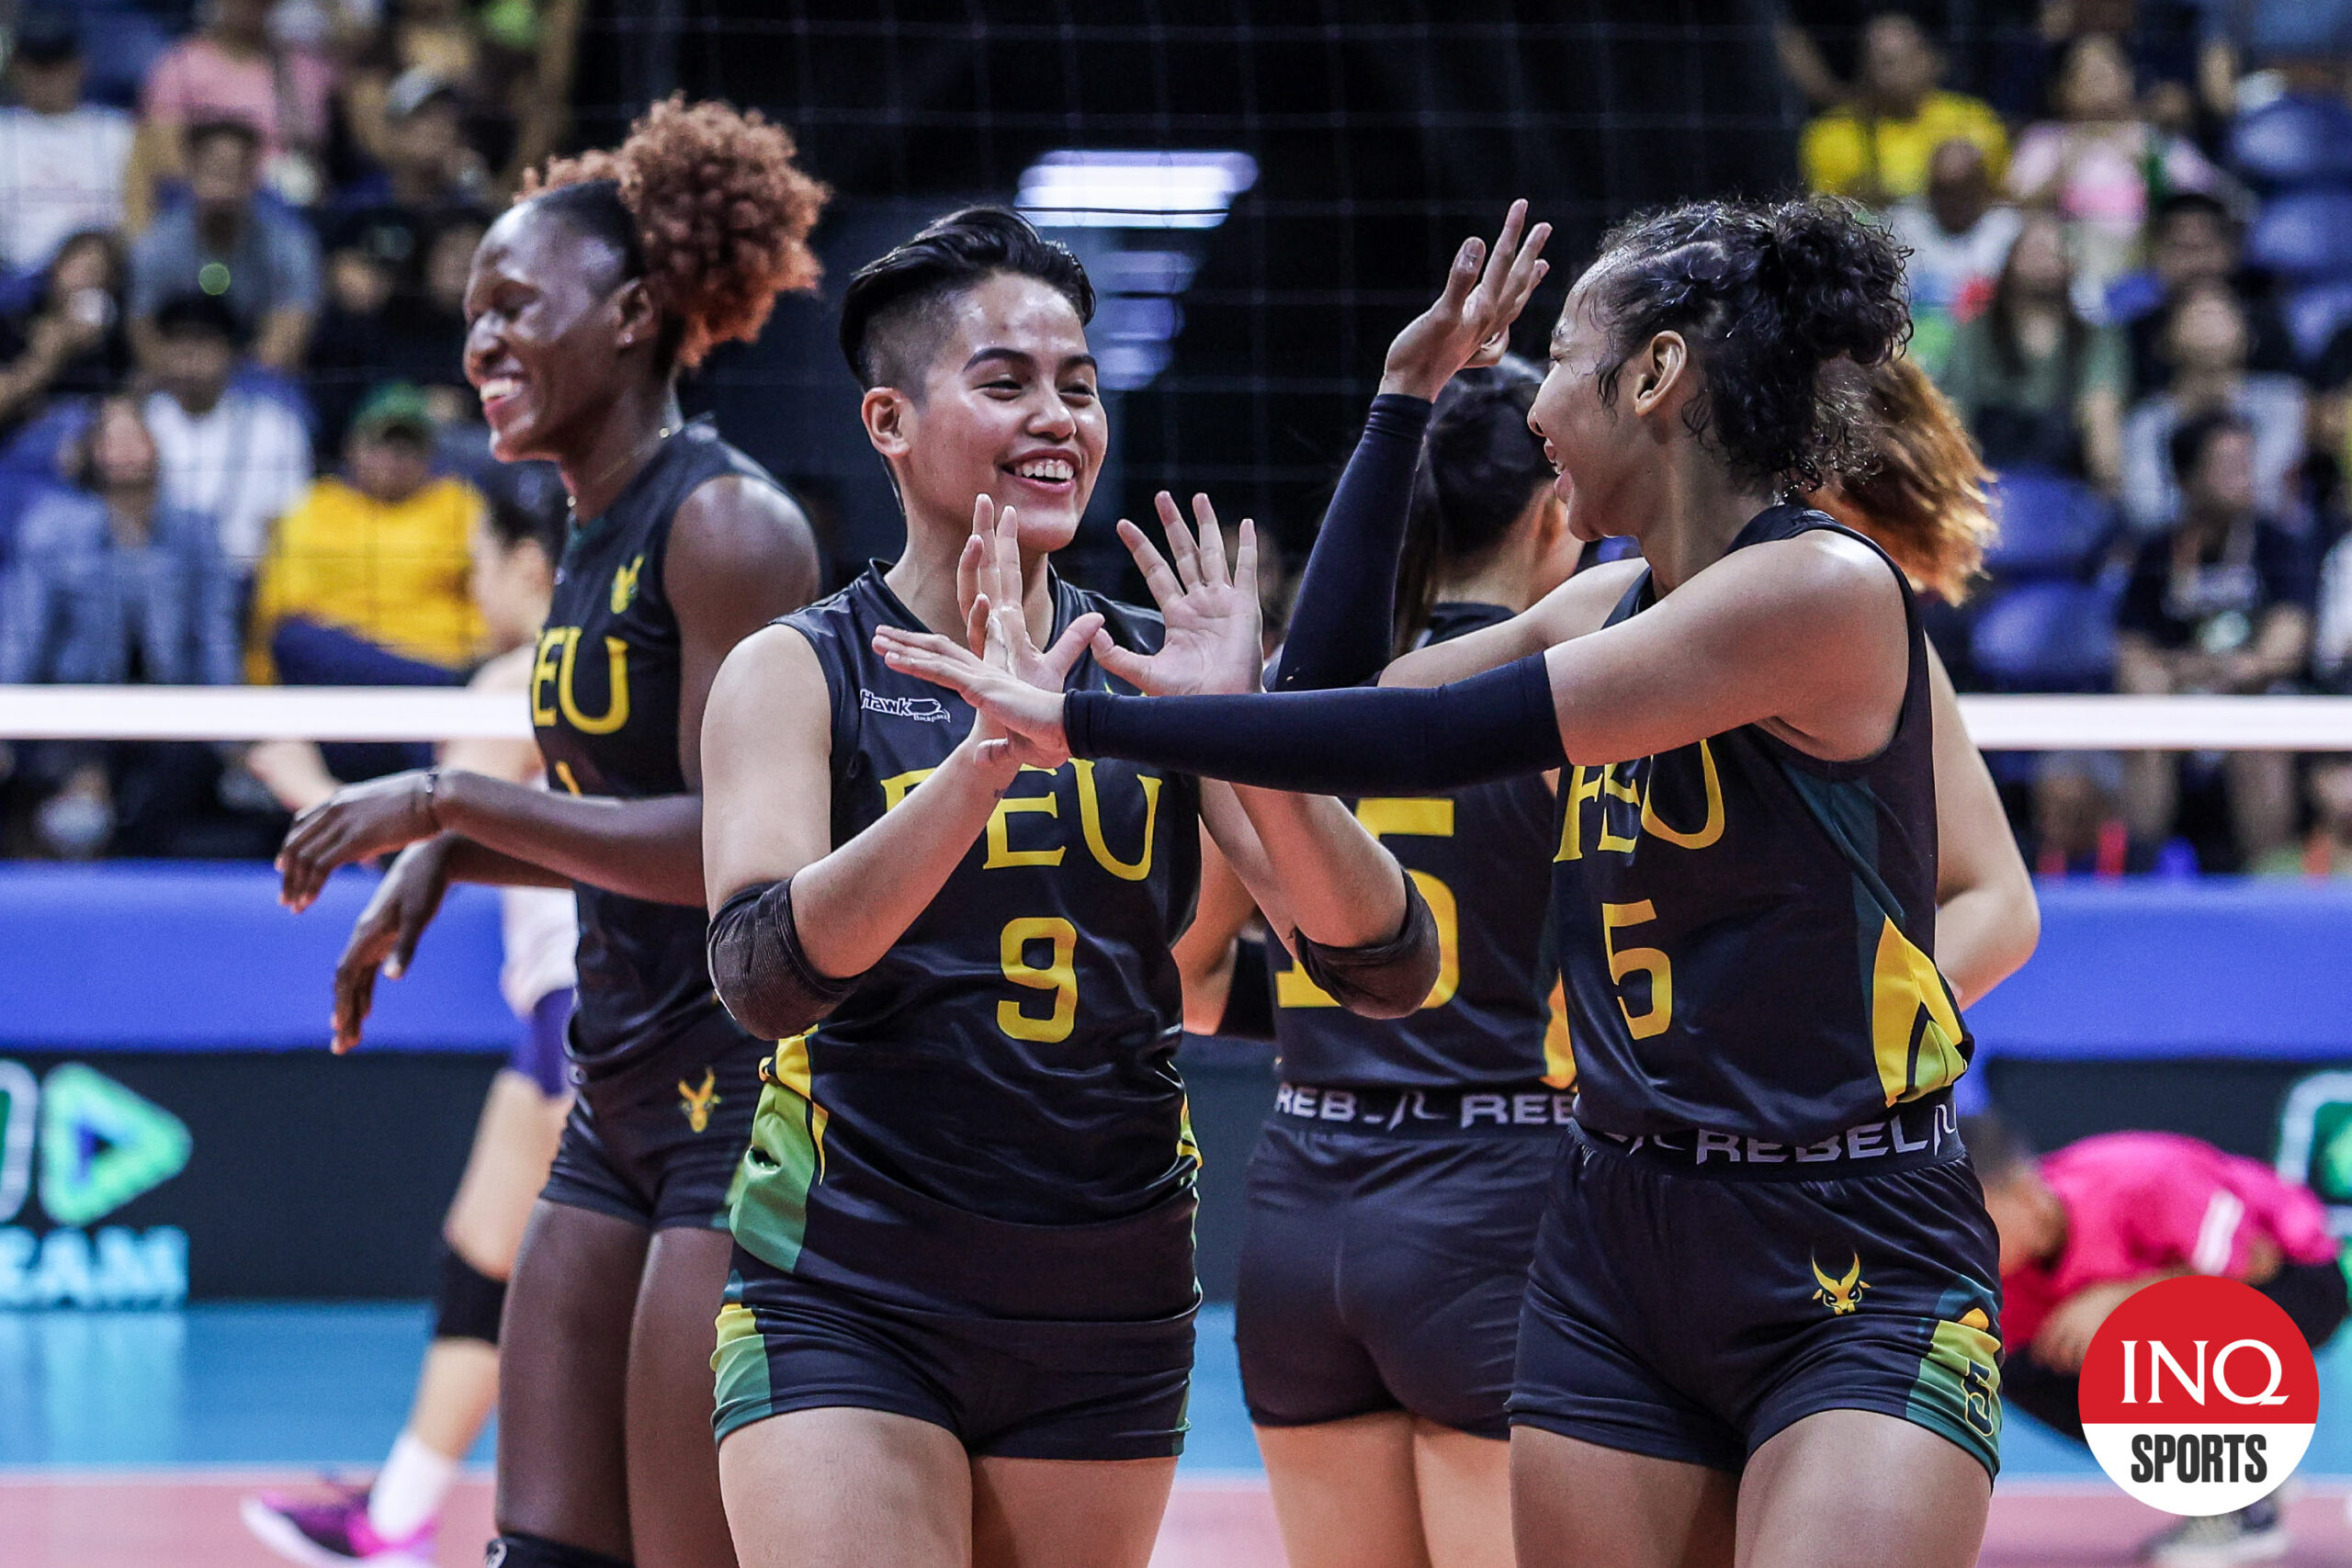 uaap: feu rises to title contender after worst-ever finish